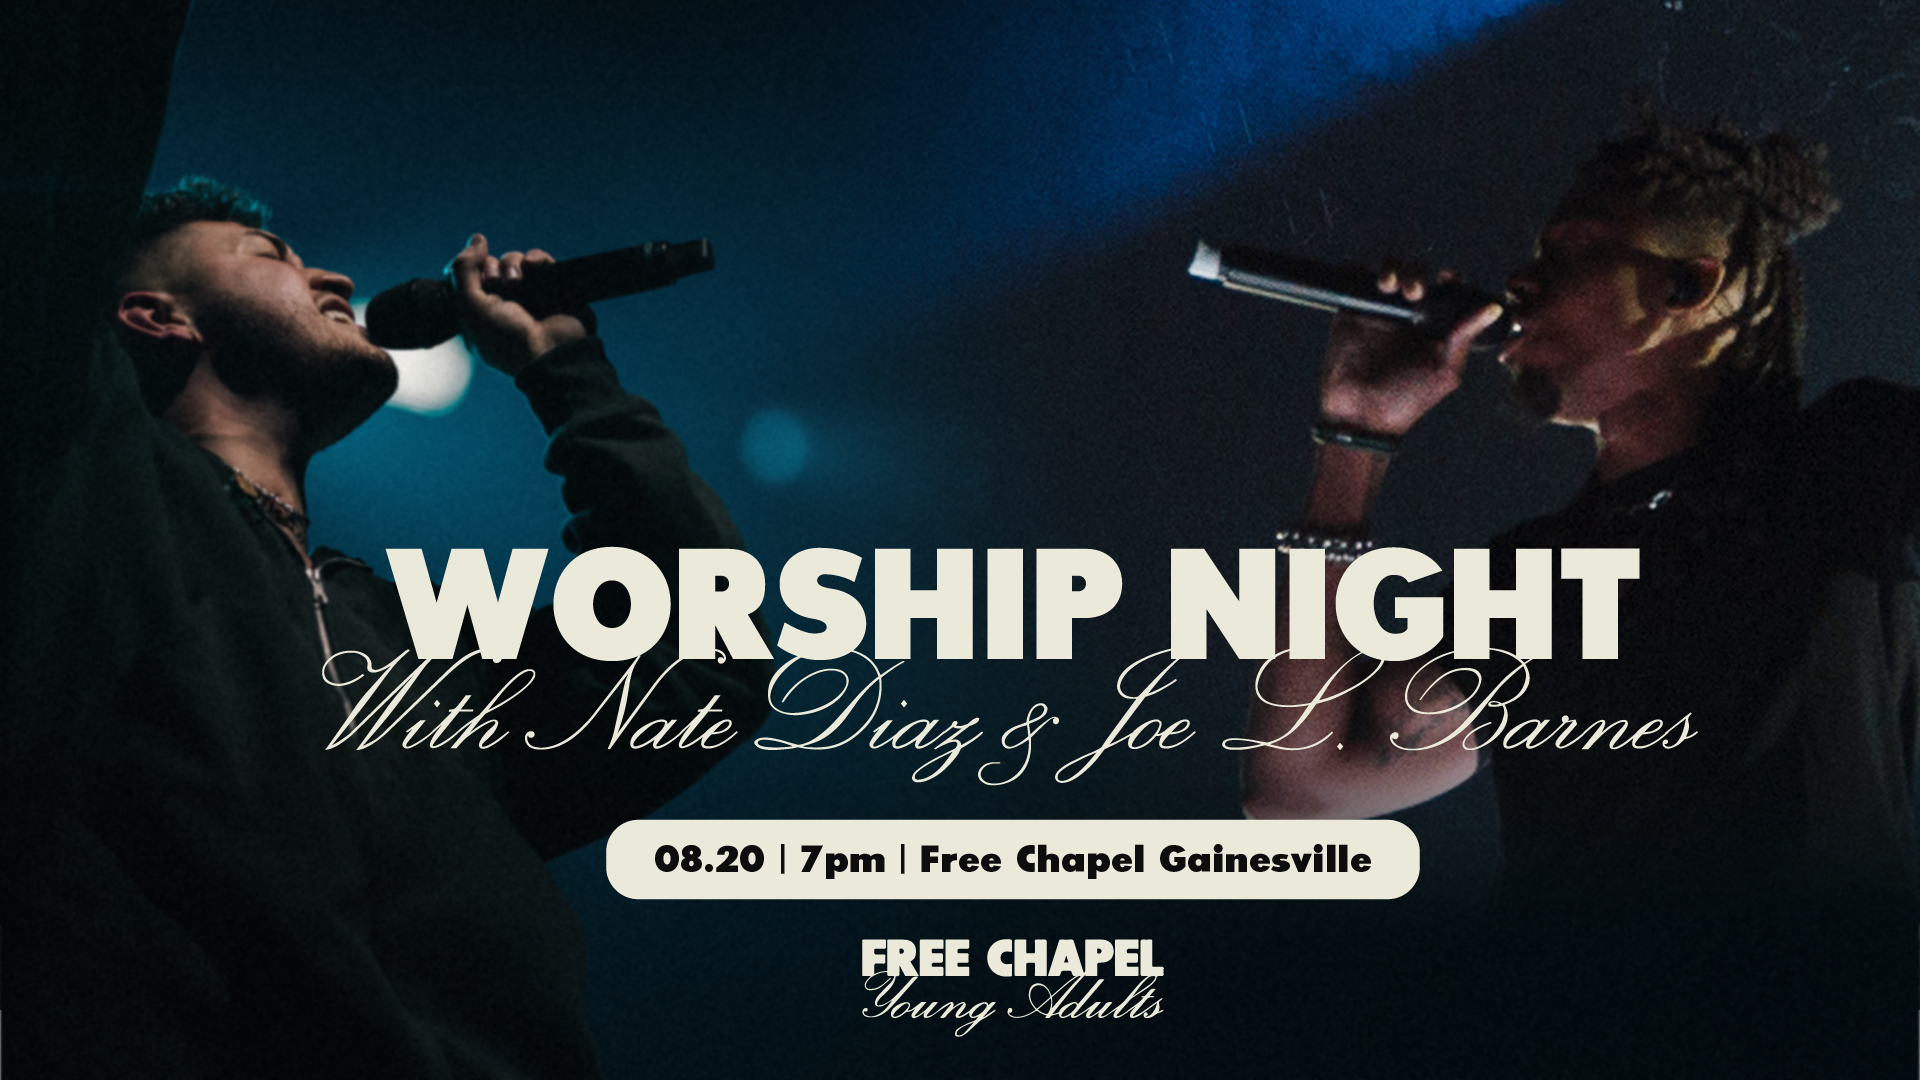 Young Adults United Worship Night with Nate Diaz & Joe L. Barnes at the Gwinnett campus